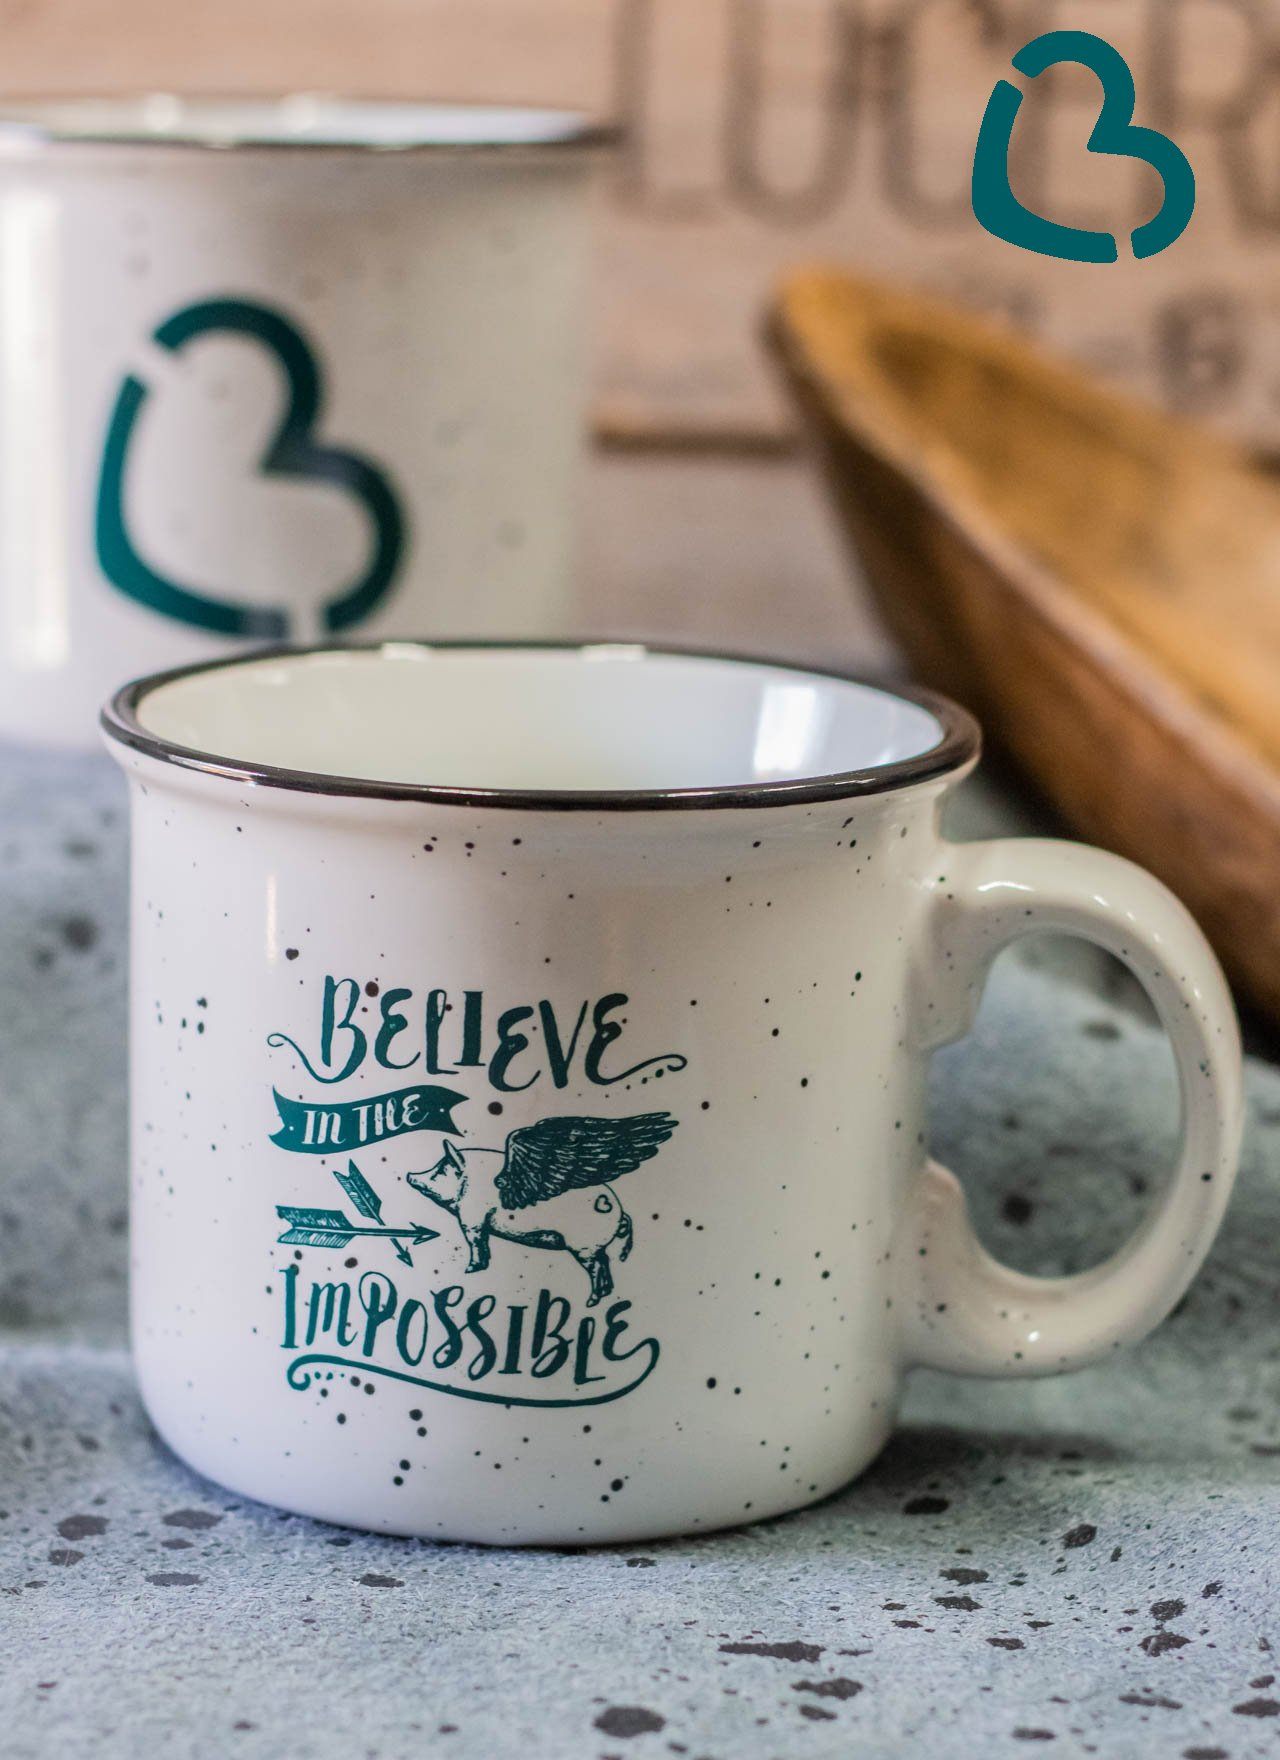 Believe in the Impossible on White Mug Accessories 74 